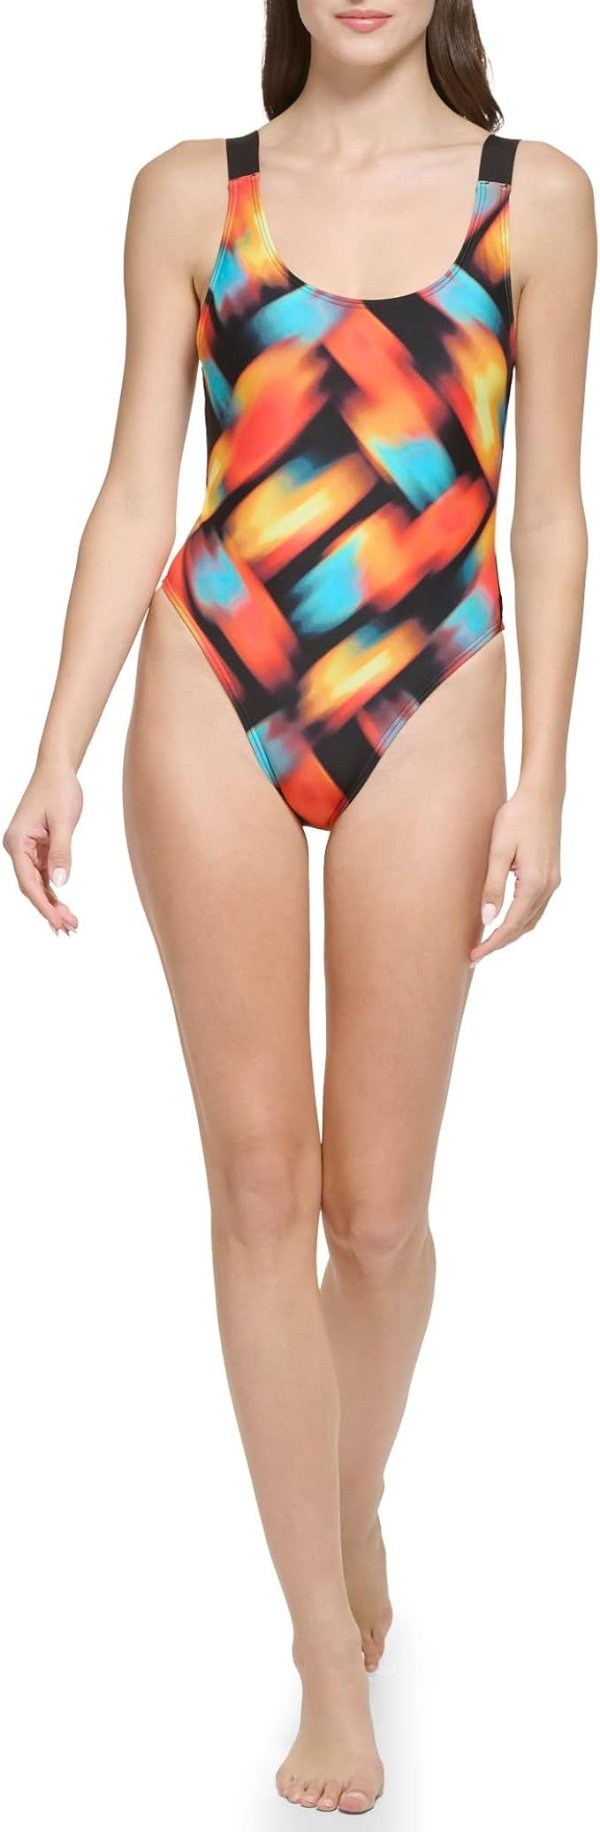 Standard Logo Elastic Straps Low-Cut Back Removable Soft Cups One Piece Swimsuit